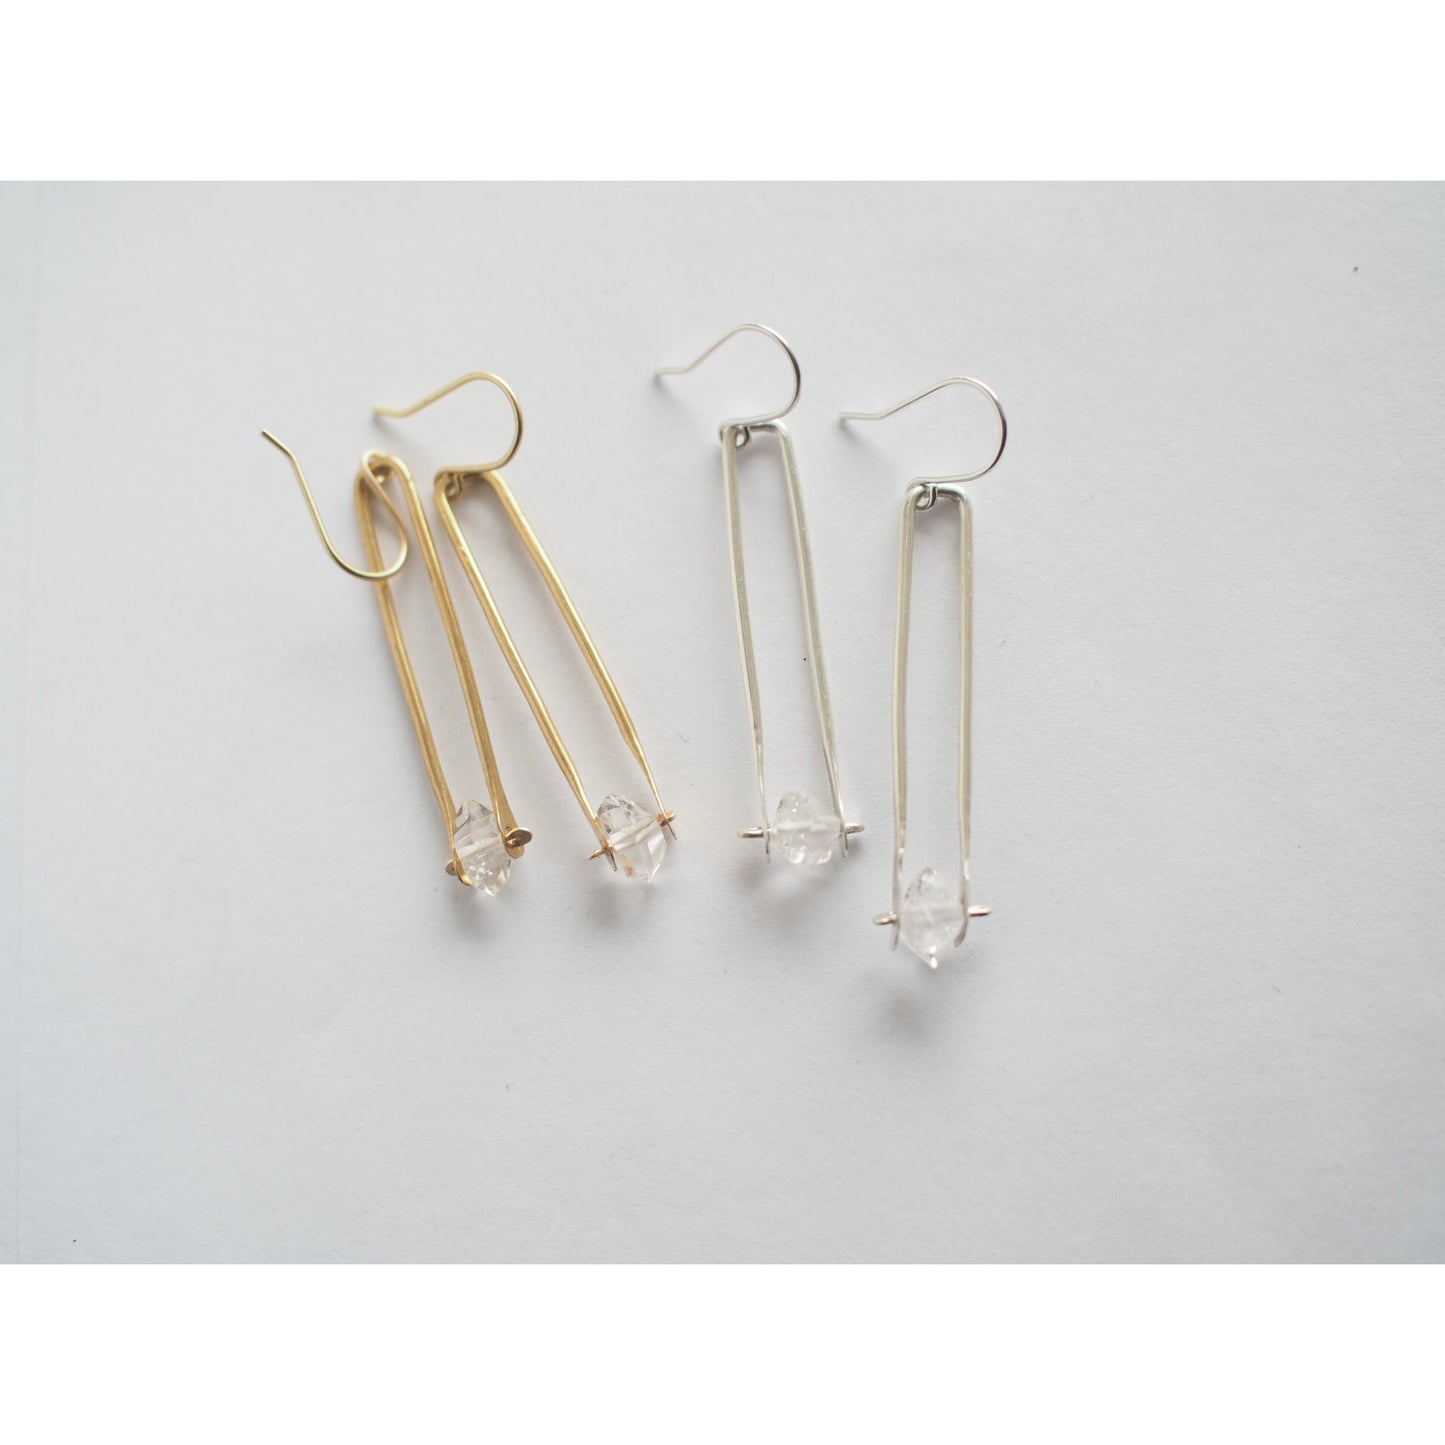 Minimalist gold frame crystal earrings by Iron Oxide